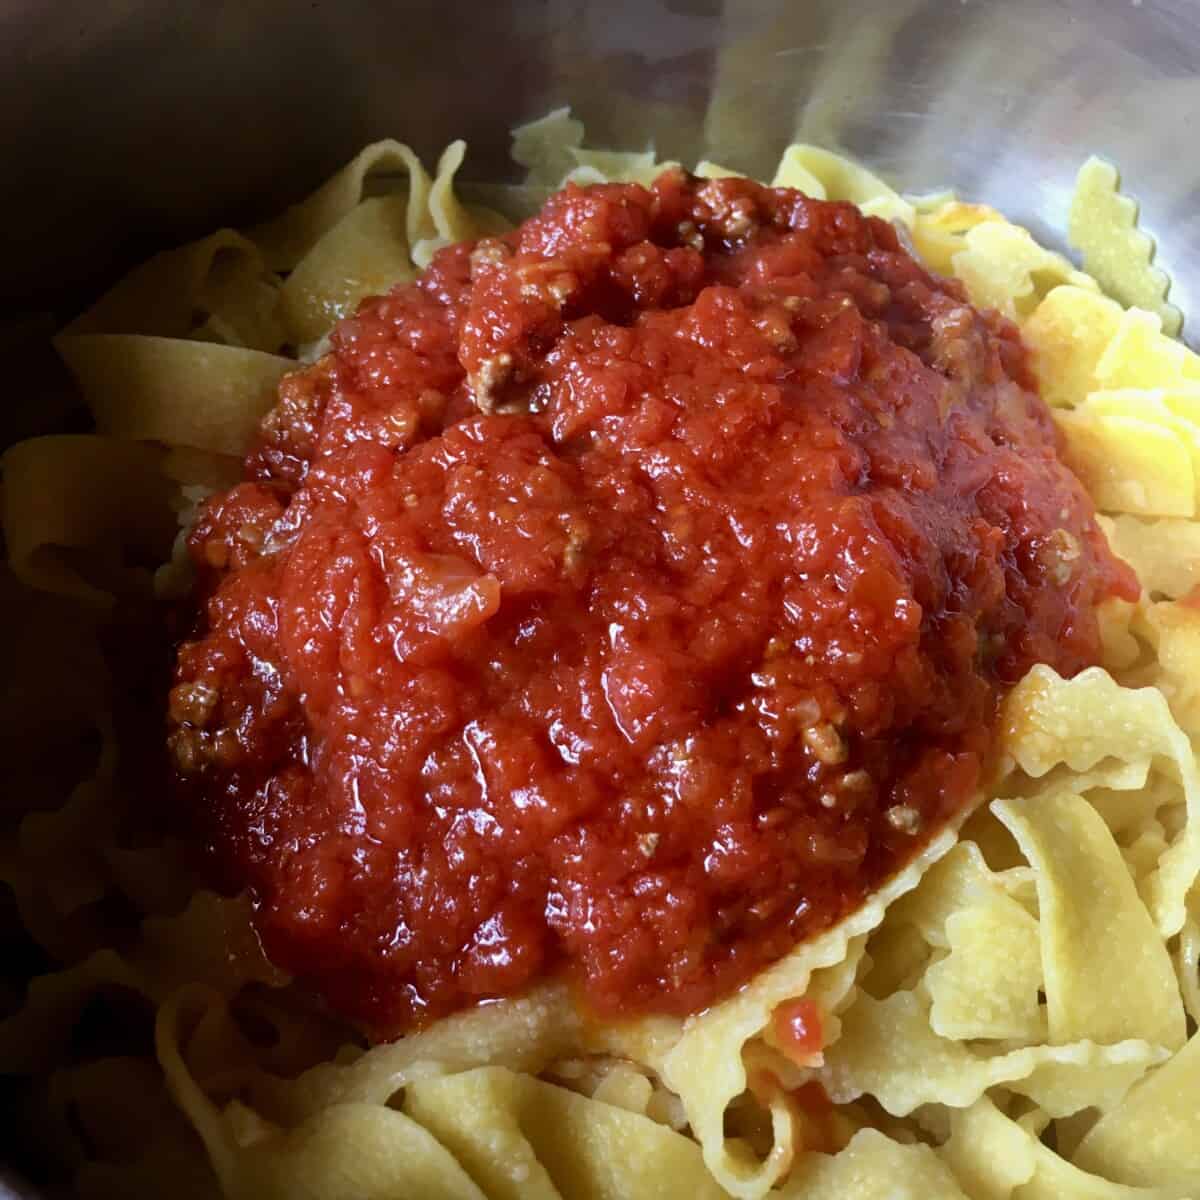 a pot full of Reginelle tagliatelle pasta which is a tagliatelle egg pasta with zigzagged edges (with a beautiful simple beef ragù (cooked less than the classic ragù an much brighter red) mixed in)